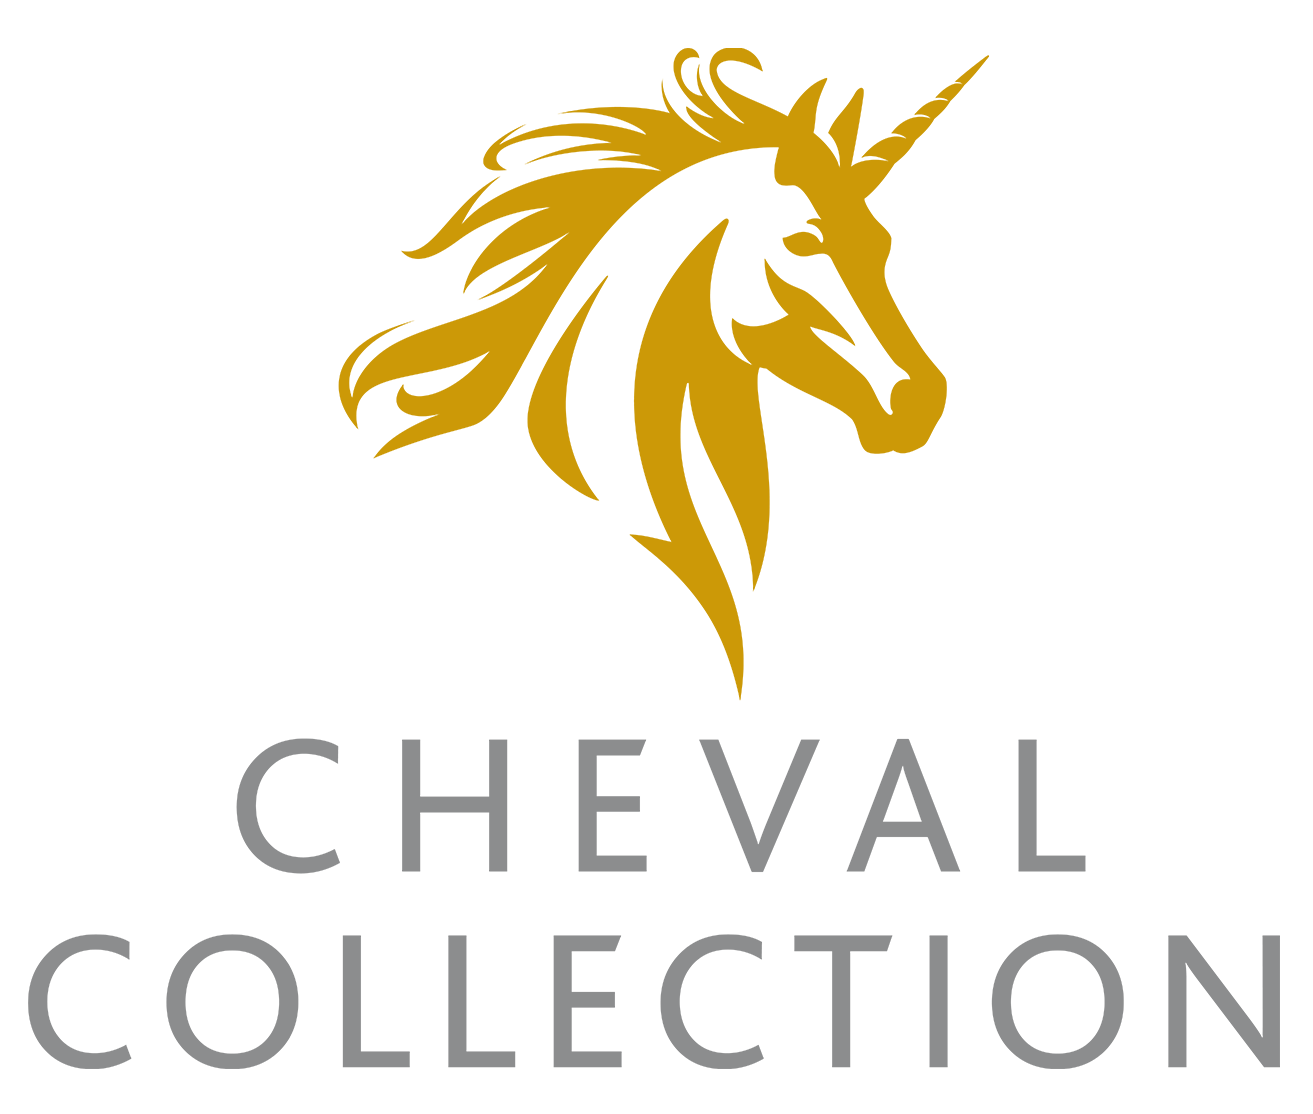 Cheval Collection